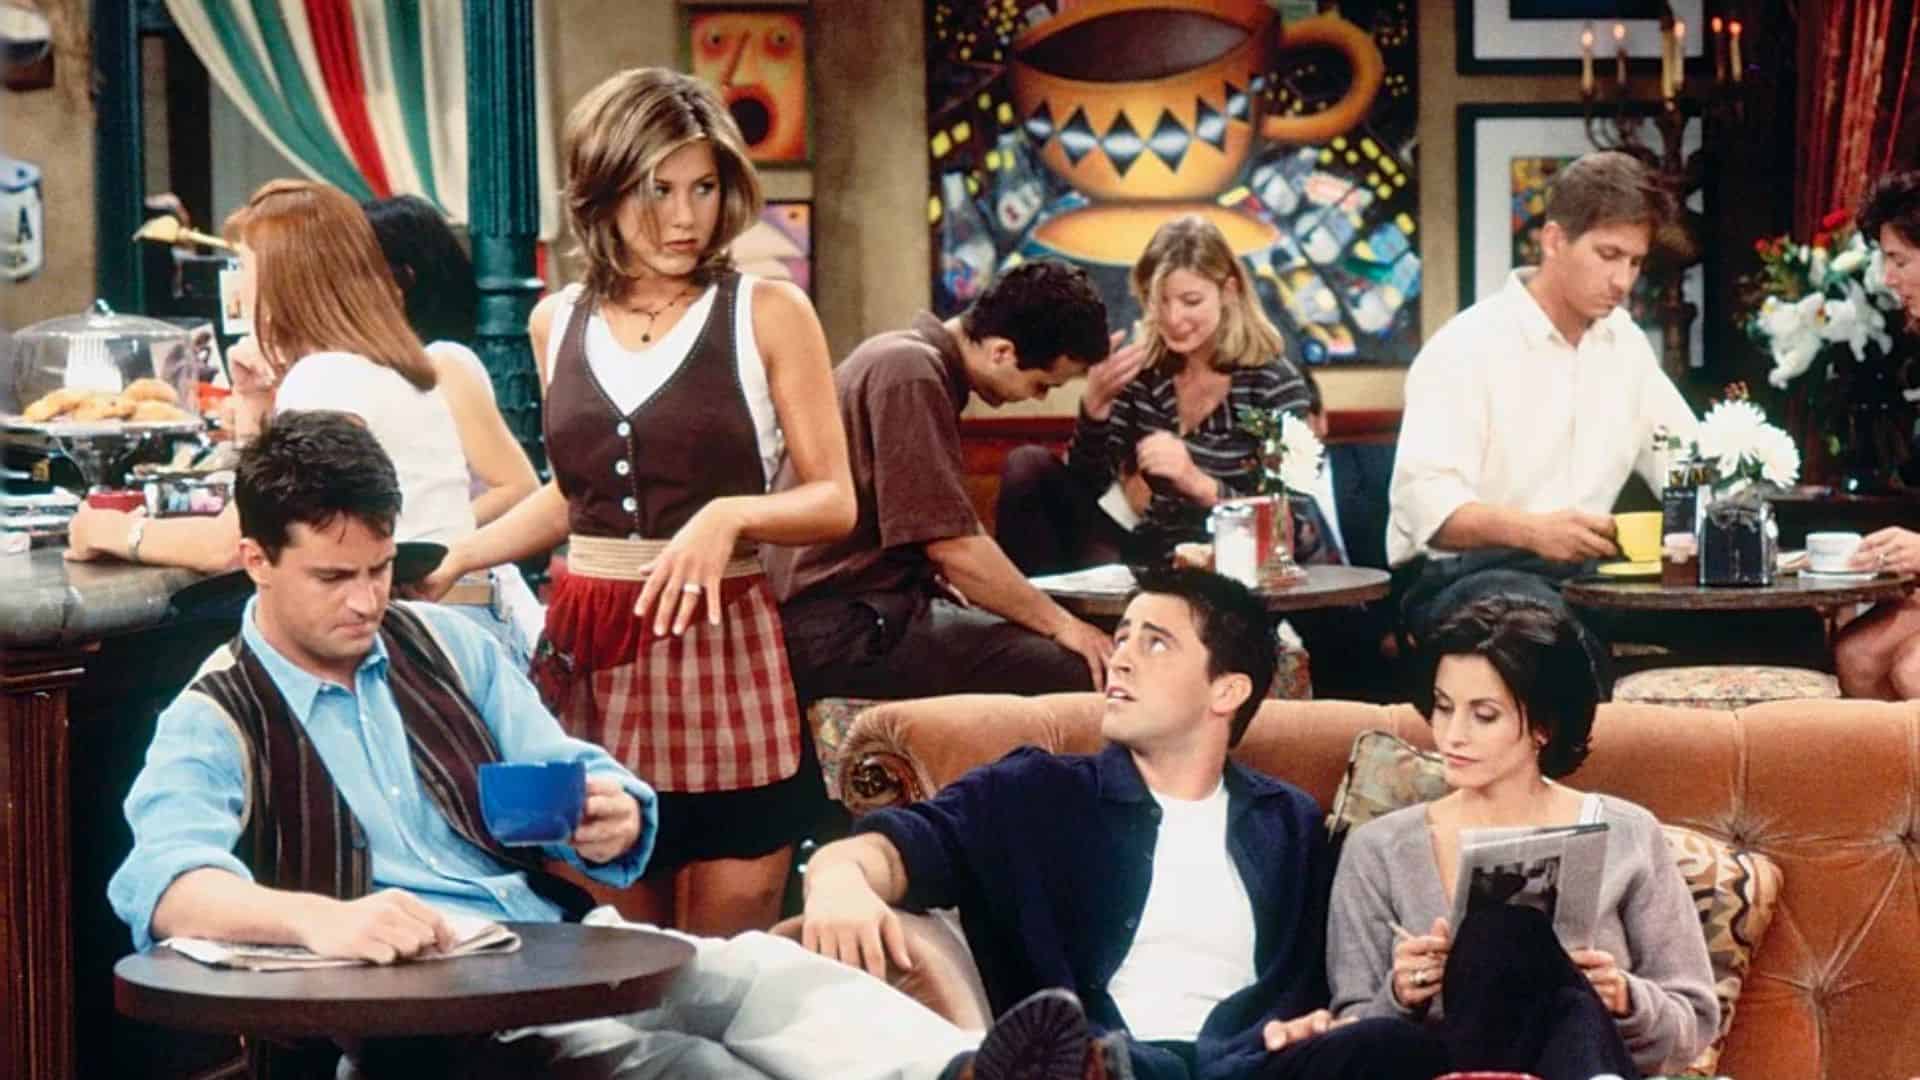 Rachel serves Chandler, Joey, and Monica at Central Perk in this image from Bright/Kauffman/Crane Productions